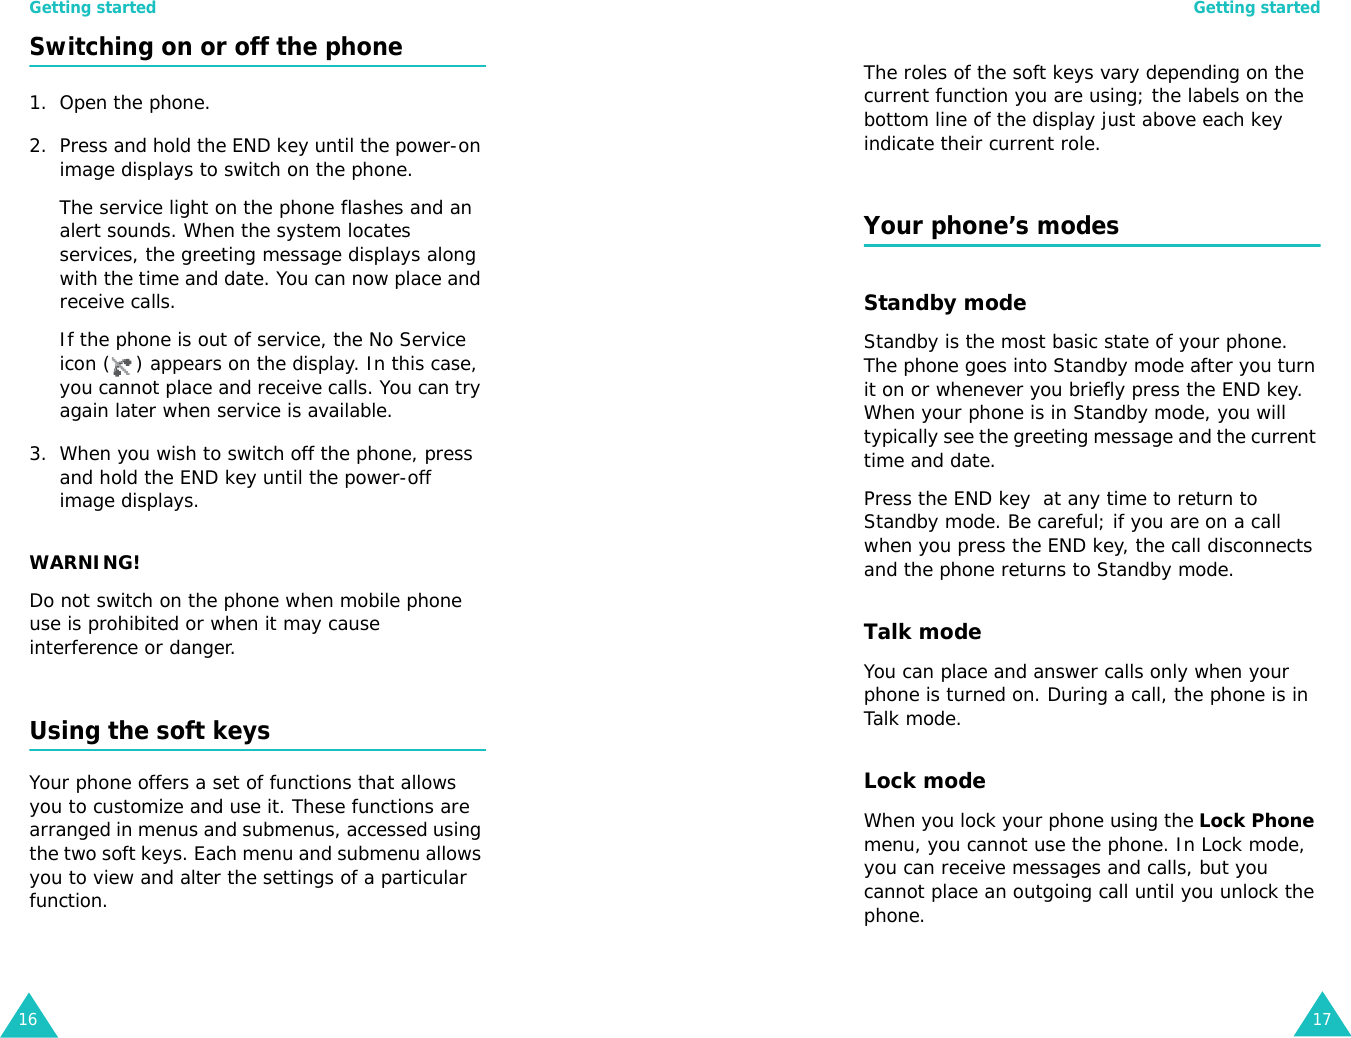 Getting started16Switching on or off the phone 1. Open the phone.2. Press and hold the END key until the power-on image displays to switch on the phone.The service light on the phone flashes and an alert sounds. When the system locates services, the greeting message displays along with the time and date. You can now place and receive calls.If the phone is out of service, the No Service icon ( ) appears on the display. In this case, you cannot place and receive calls. You can try again later when service is available.3. When you wish to switch off the phone, press and hold the END key until the power-off image displays.WARNING!Do not switch on the phone when mobile phone use is prohibited or when it may cause interference or danger.Using the soft keysYour phone offers a set of functions that allows you to customize and use it. These functions are arranged in menus and submenus, accessed using the two soft keys. Each menu and submenu allows you to view and alter the settings of a particular function.Getting started17The roles of the soft keys vary depending on the current function you are using; the labels on the bottom line of the display just above each key indicate their current role.Your phone’s modesStandby modeStandby is the most basic state of your phone. The phone goes into Standby mode after you turn it on or whenever you briefly press the END key. When your phone is in Standby mode, you will typically see the greeting message and the current time and date. Press the END key  at any time to return to Standby mode. Be careful; if you are on a call when you press the END key, the call disconnects and the phone returns to Standby mode. Talk modeYou can place and answer calls only when your phone is turned on. During a call, the phone is in Talk mode.Lock modeWhen you lock your phone using the Lock Phone menu, you cannot use the phone. In Lock mode, you can receive messages and calls, but you cannot place an outgoing call until you unlock the phone. 